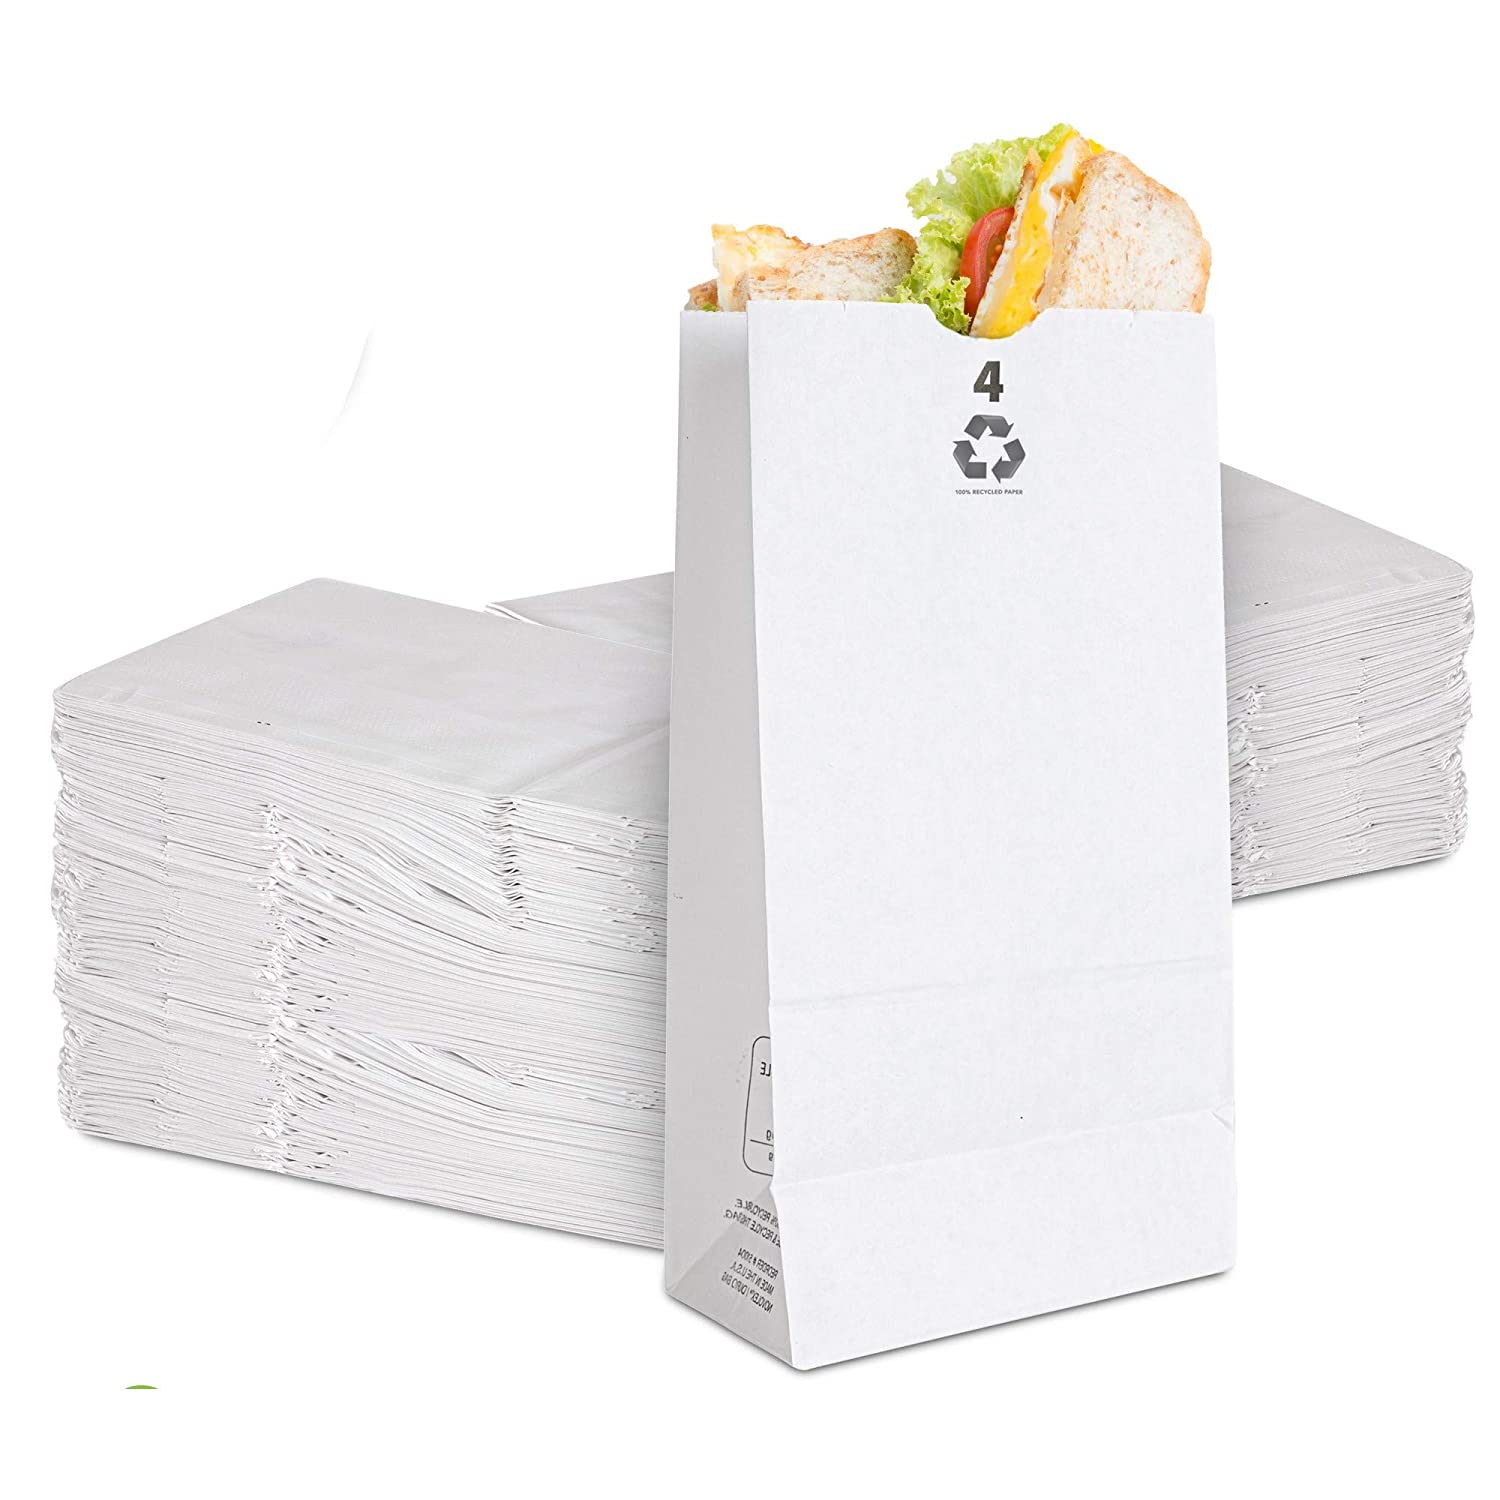 Stock Your Home 4 Lb White Paper Bags (250 Count) - Eco Friendly White